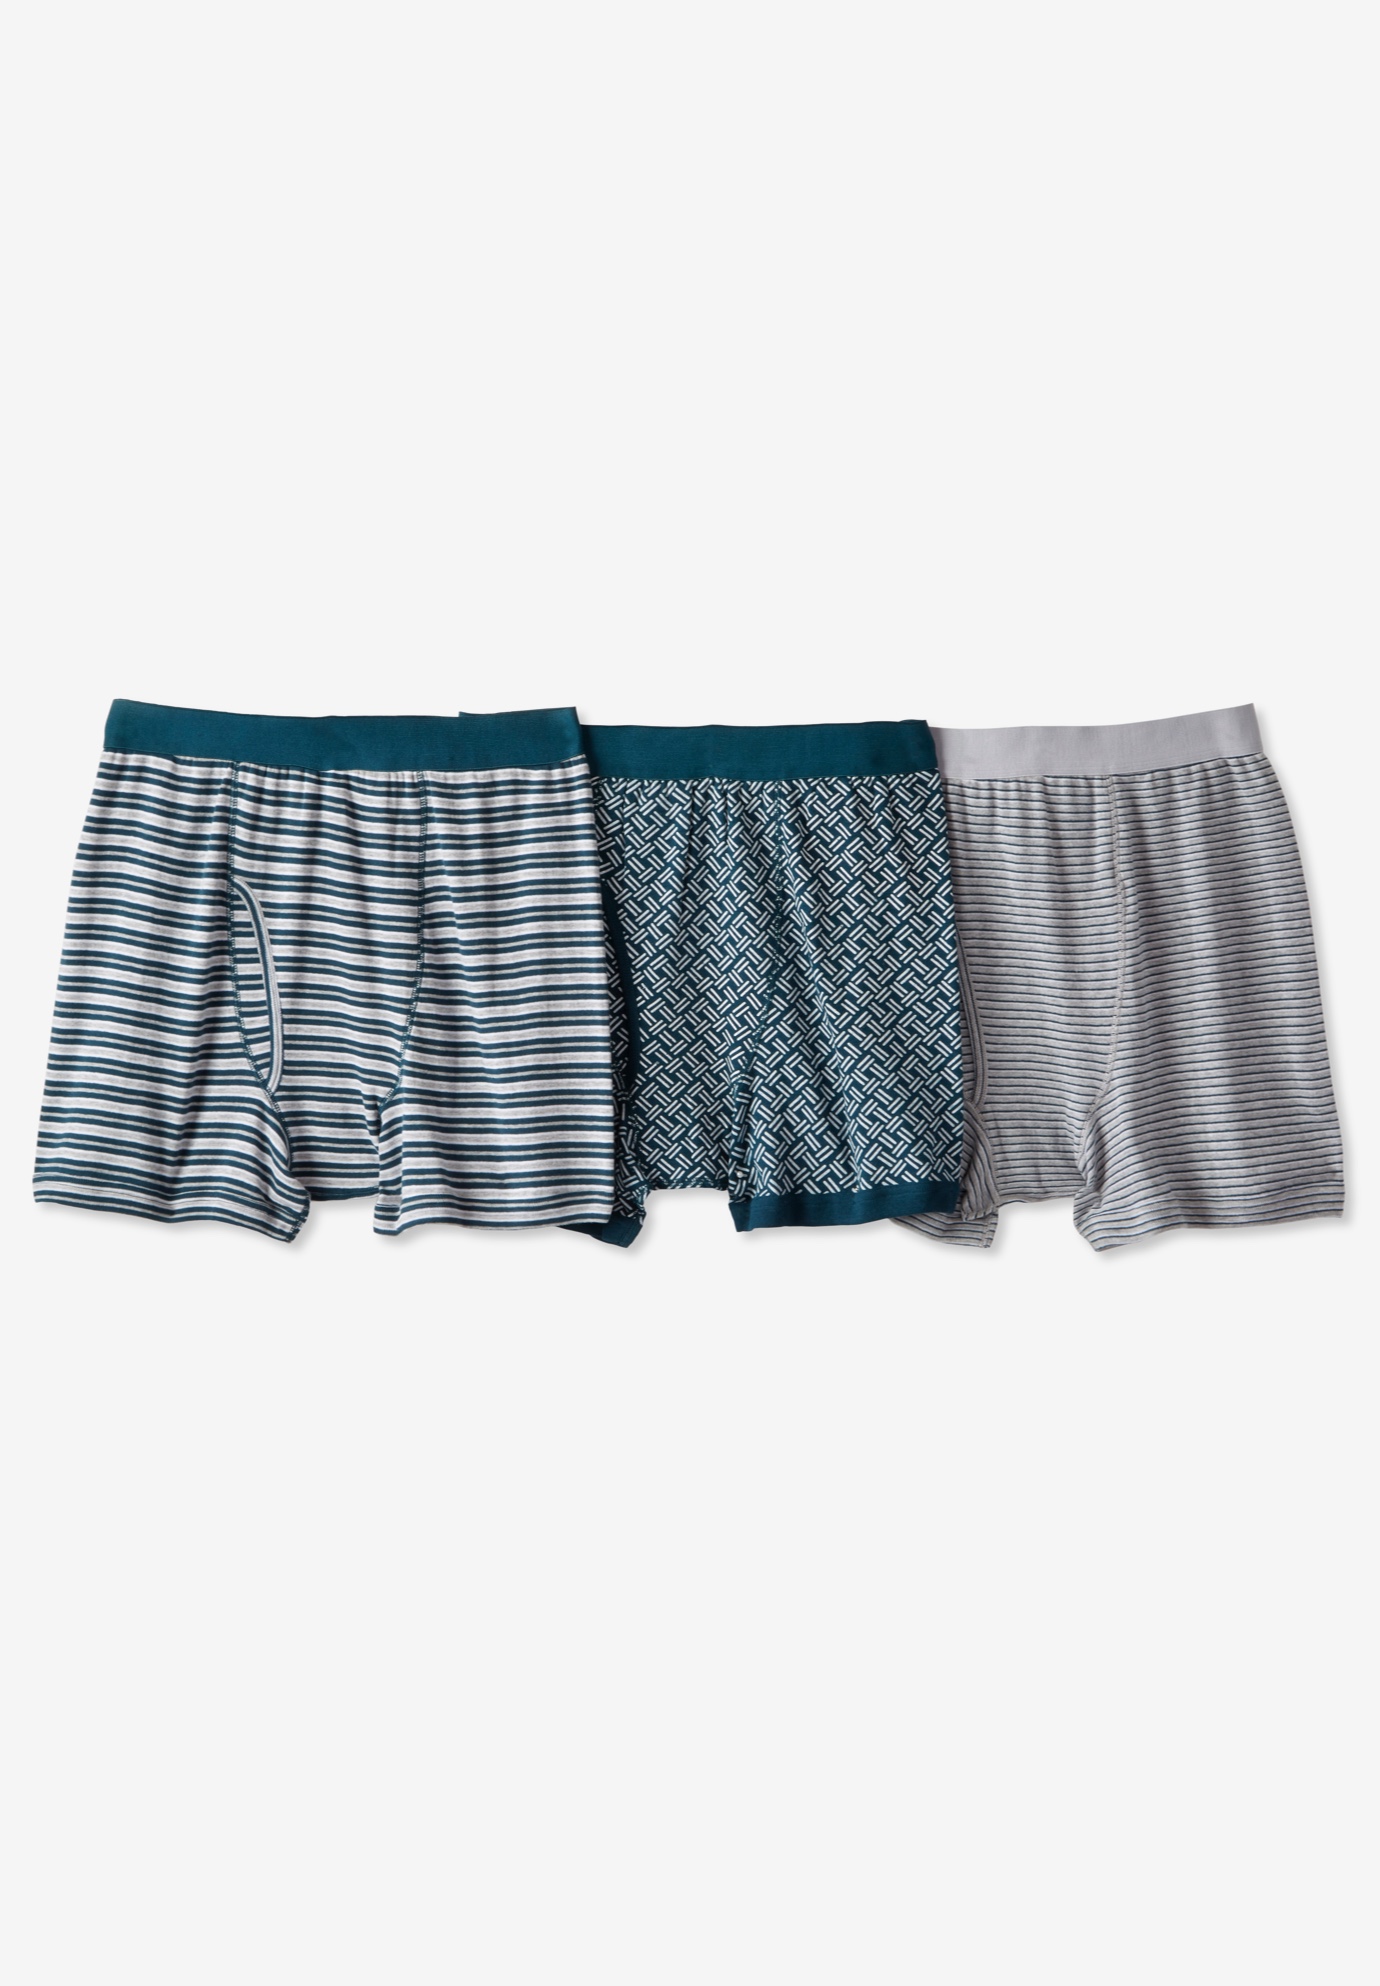 Cotton Boxer Briefs 3-Pack | Intimates For All